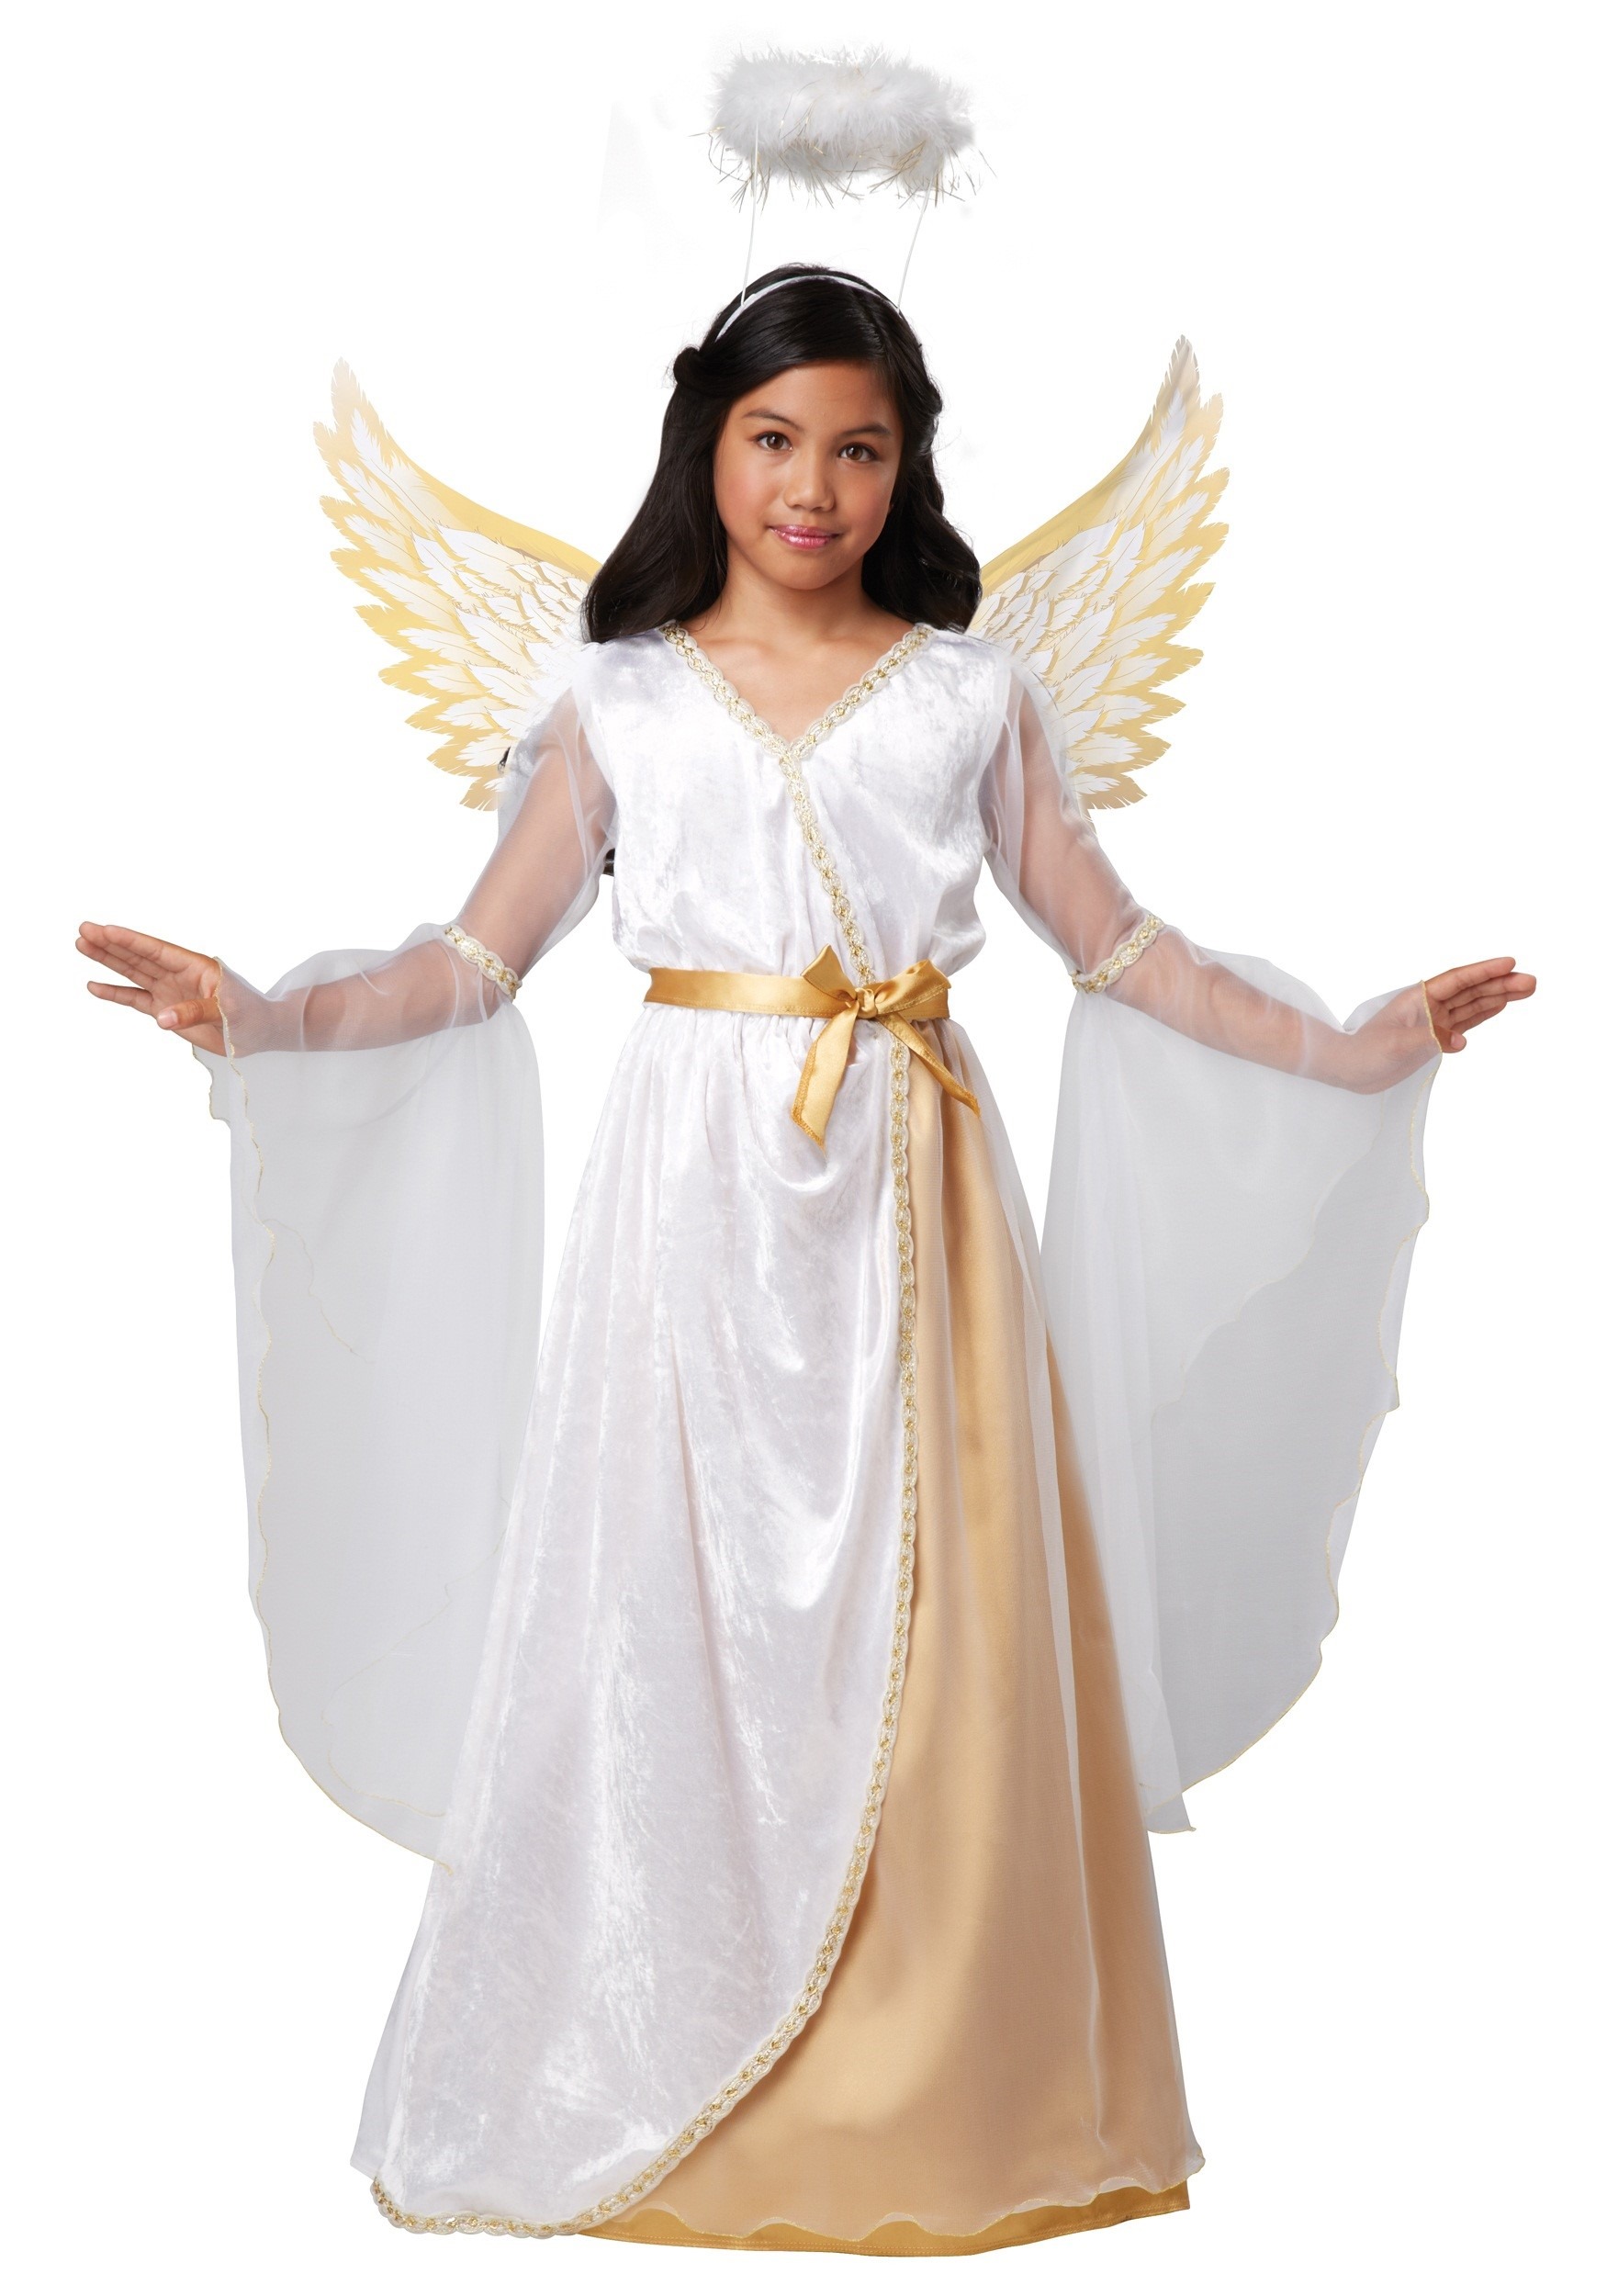 Photos - Fancy Dress California Costume Collection Guardian Angel Costume for Girls Orange/ 